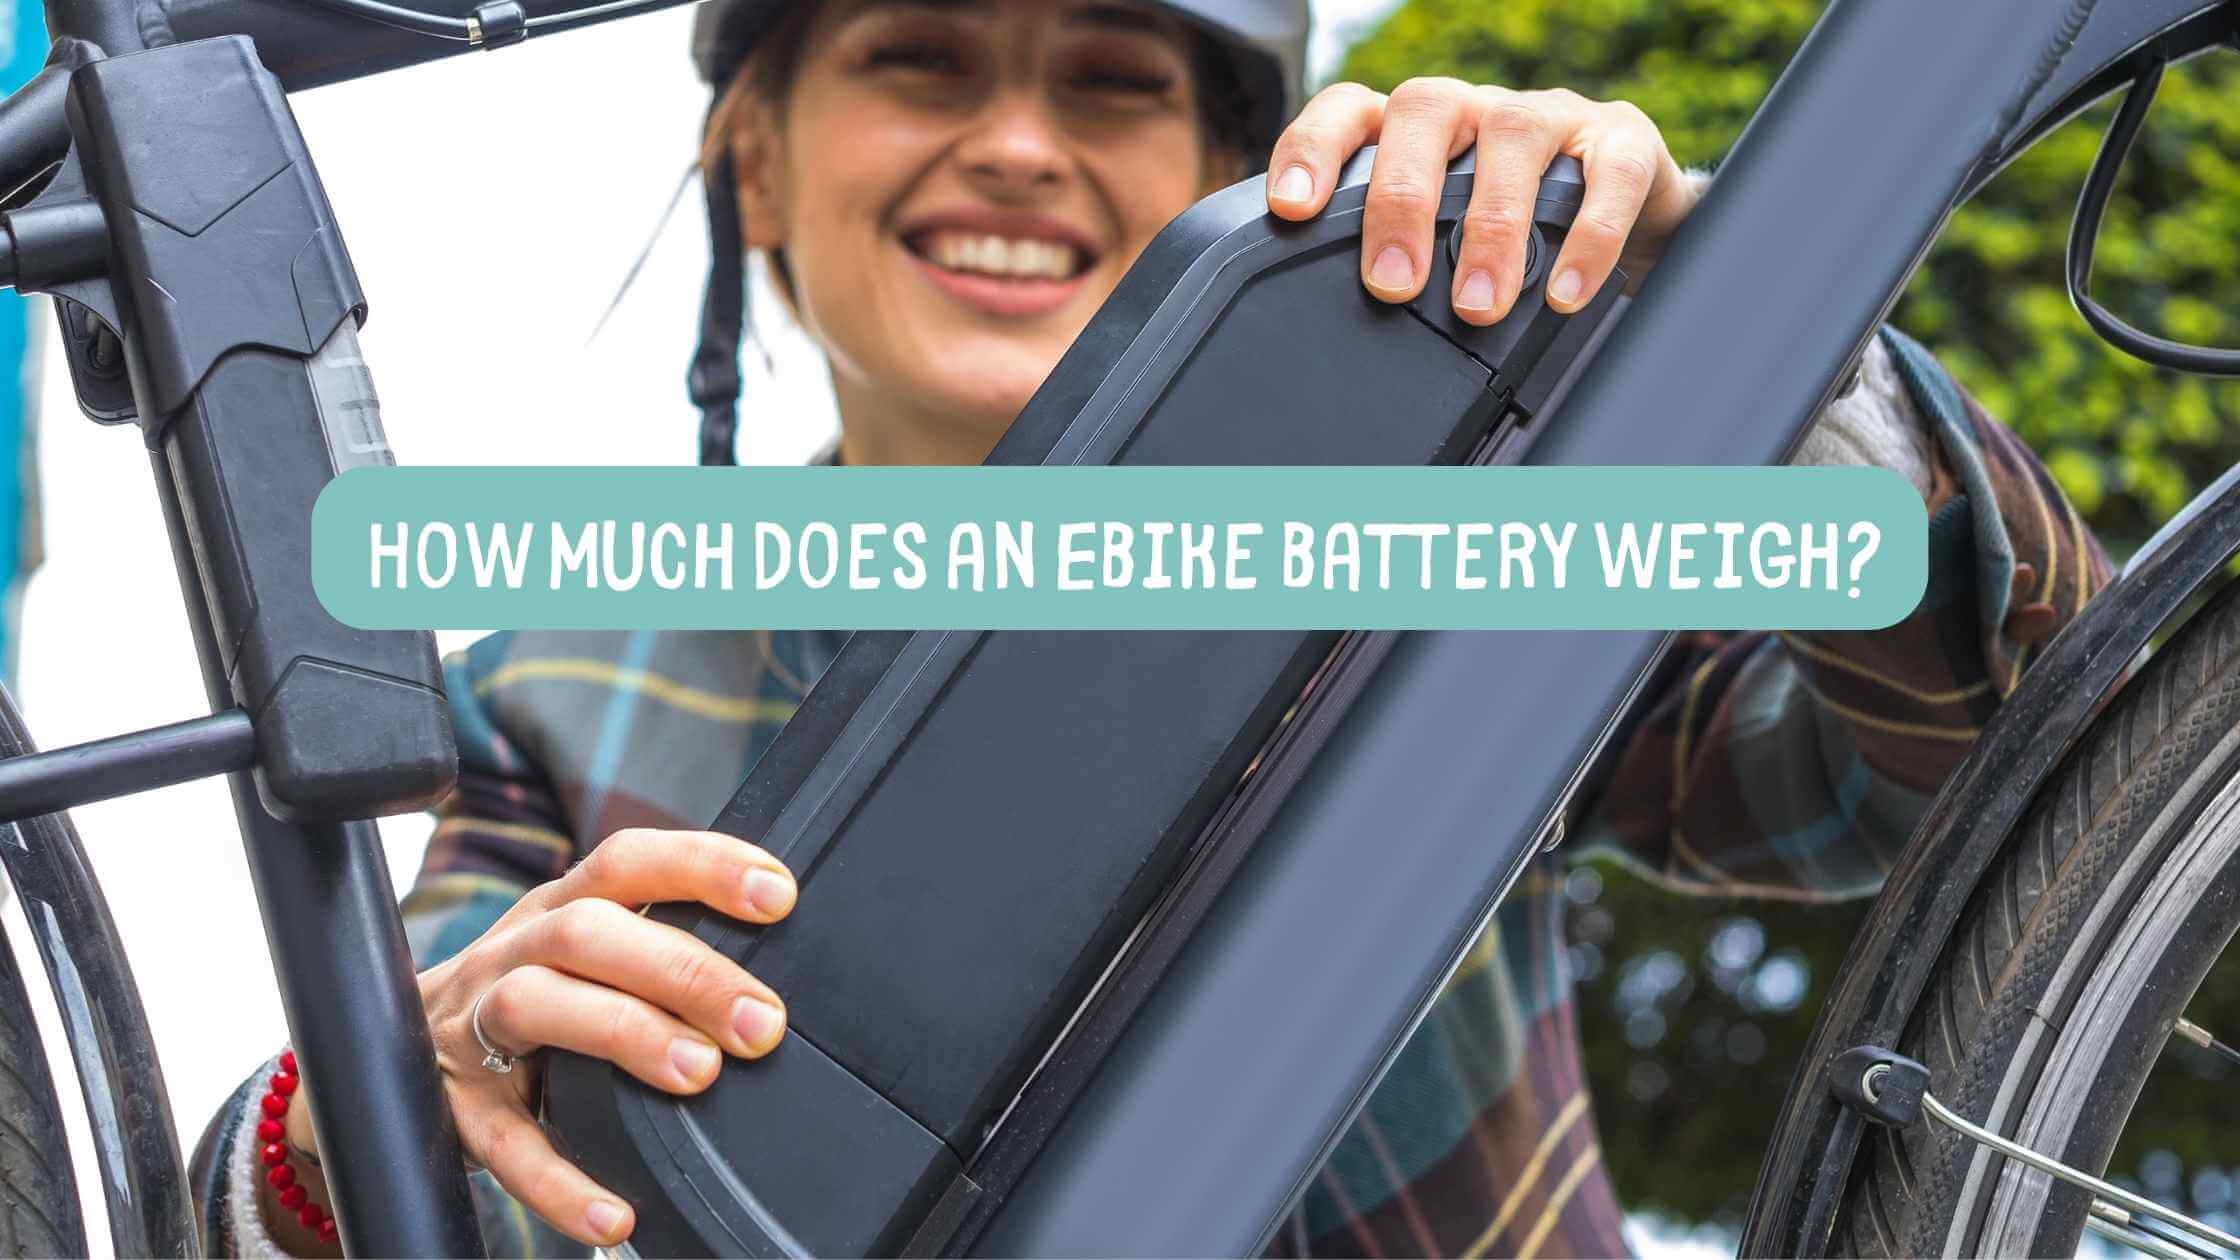 How Much Does an Ebike Battery Weigh